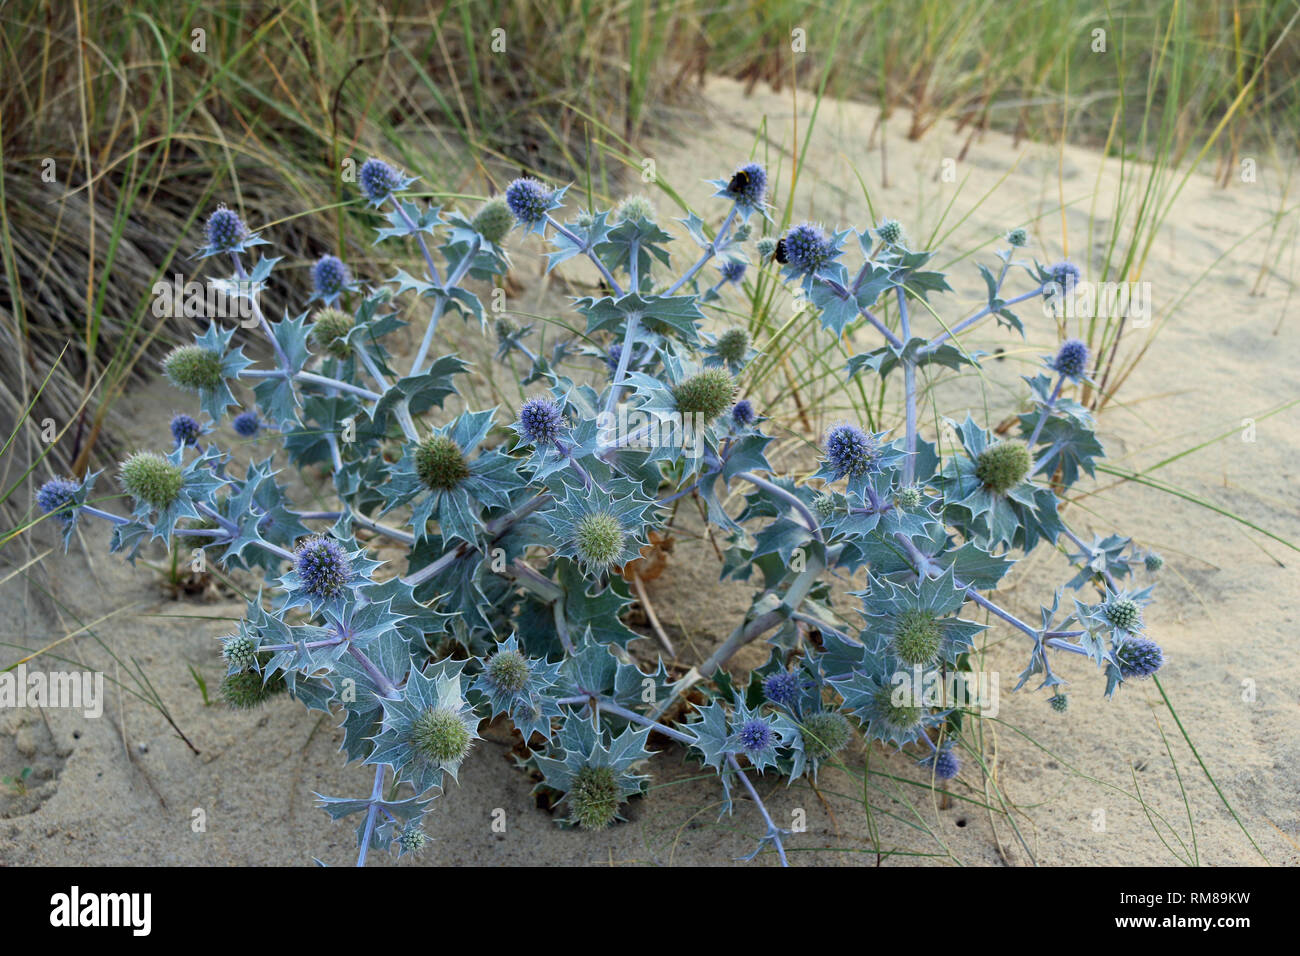 Native UK sea holly, Eryngium maritimum, with blue stems and flowers and growing on a sand dune with grass in the background. Stock Photo